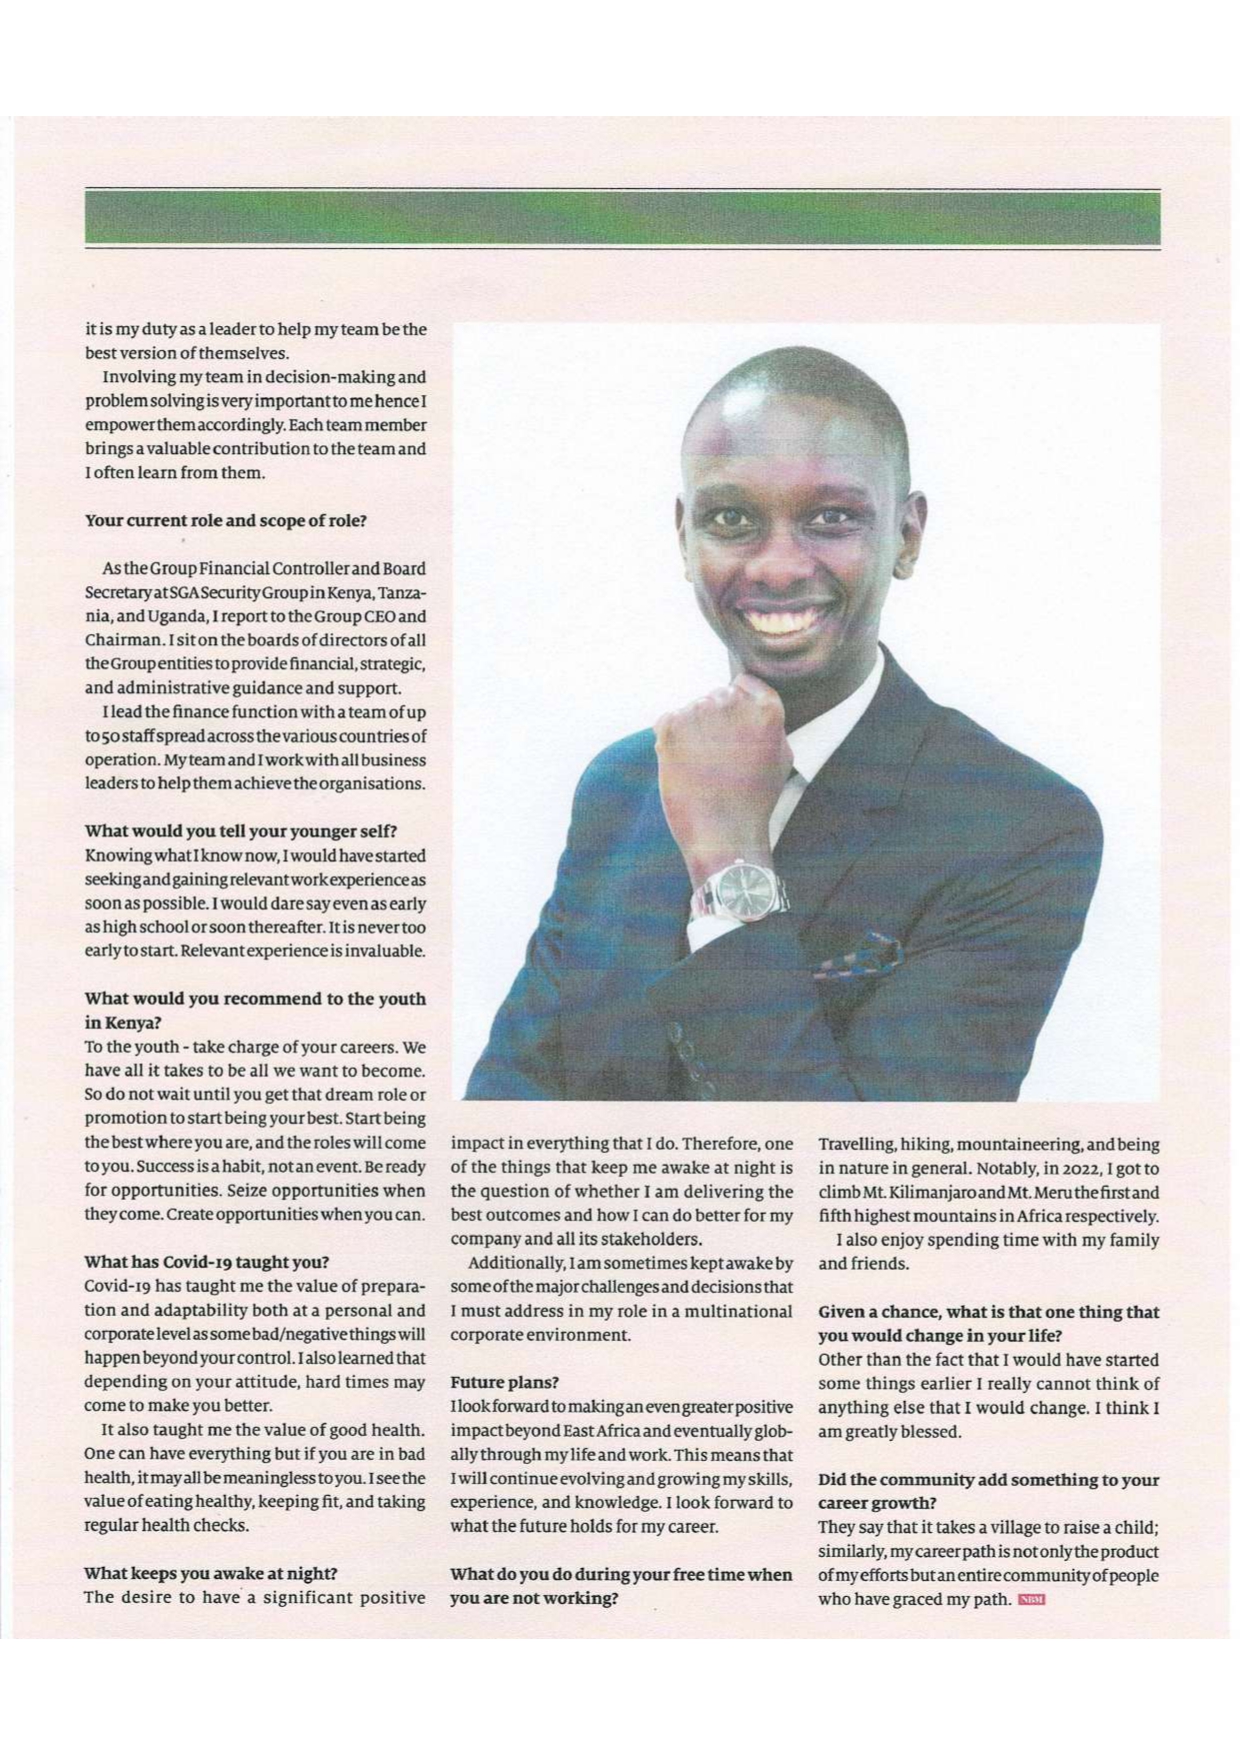 Joseph Thuku poses for newspaper clipping